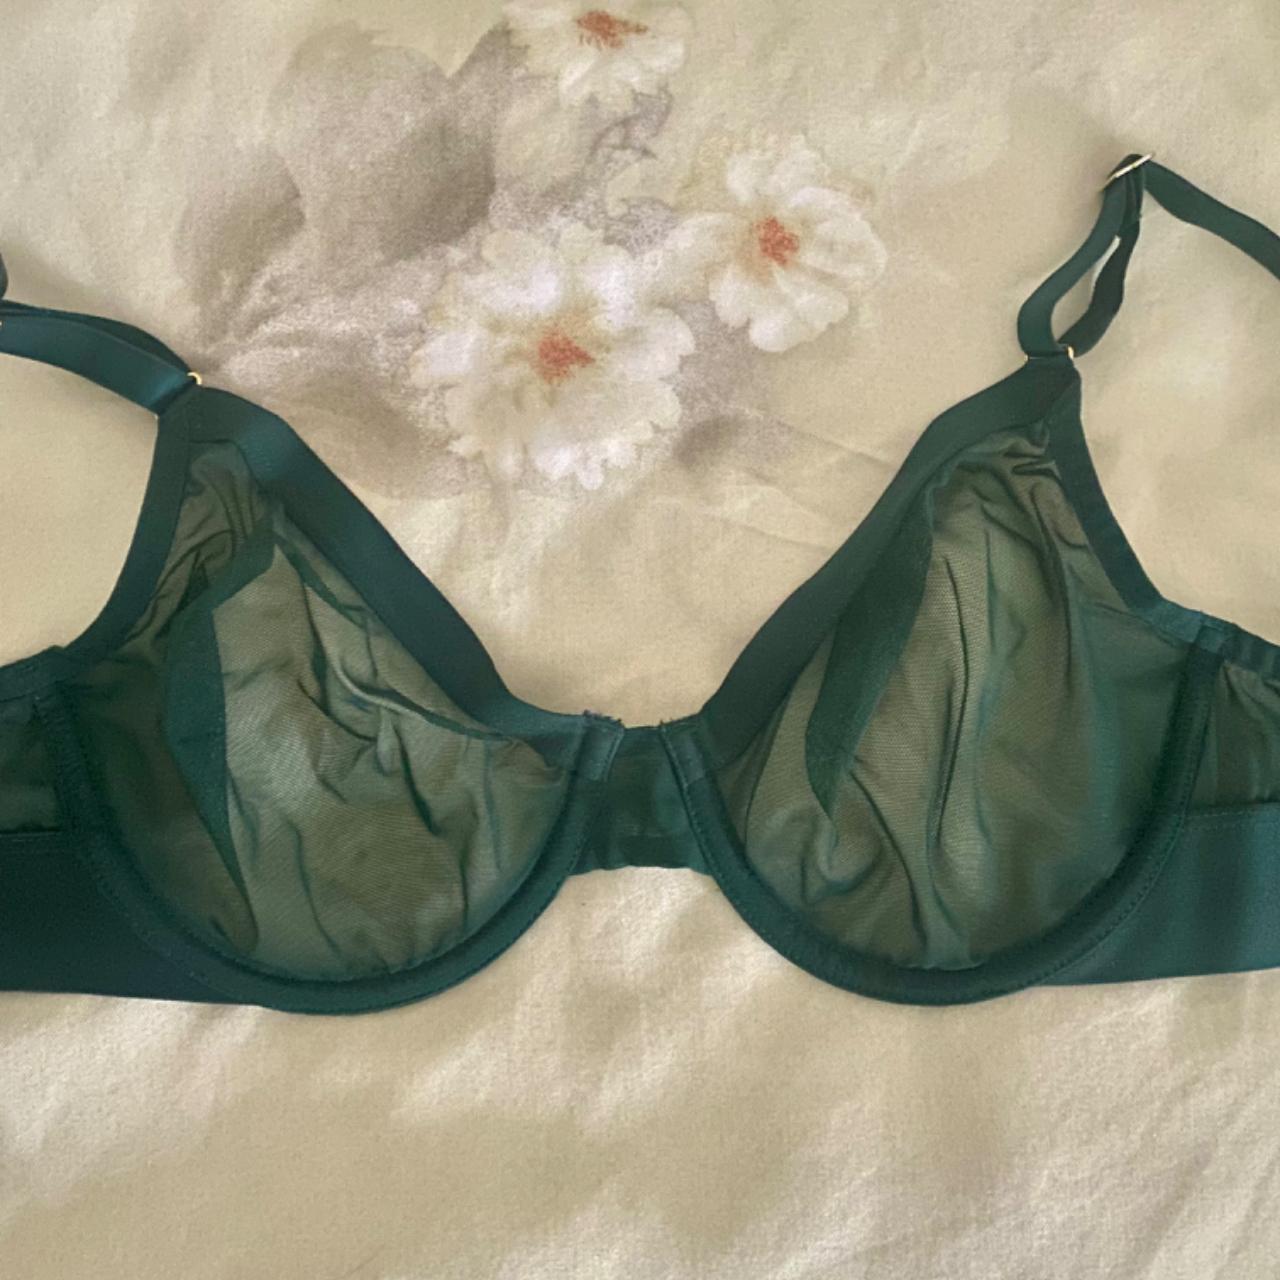 aerie forest green push up bra with lace band, 32c - Depop